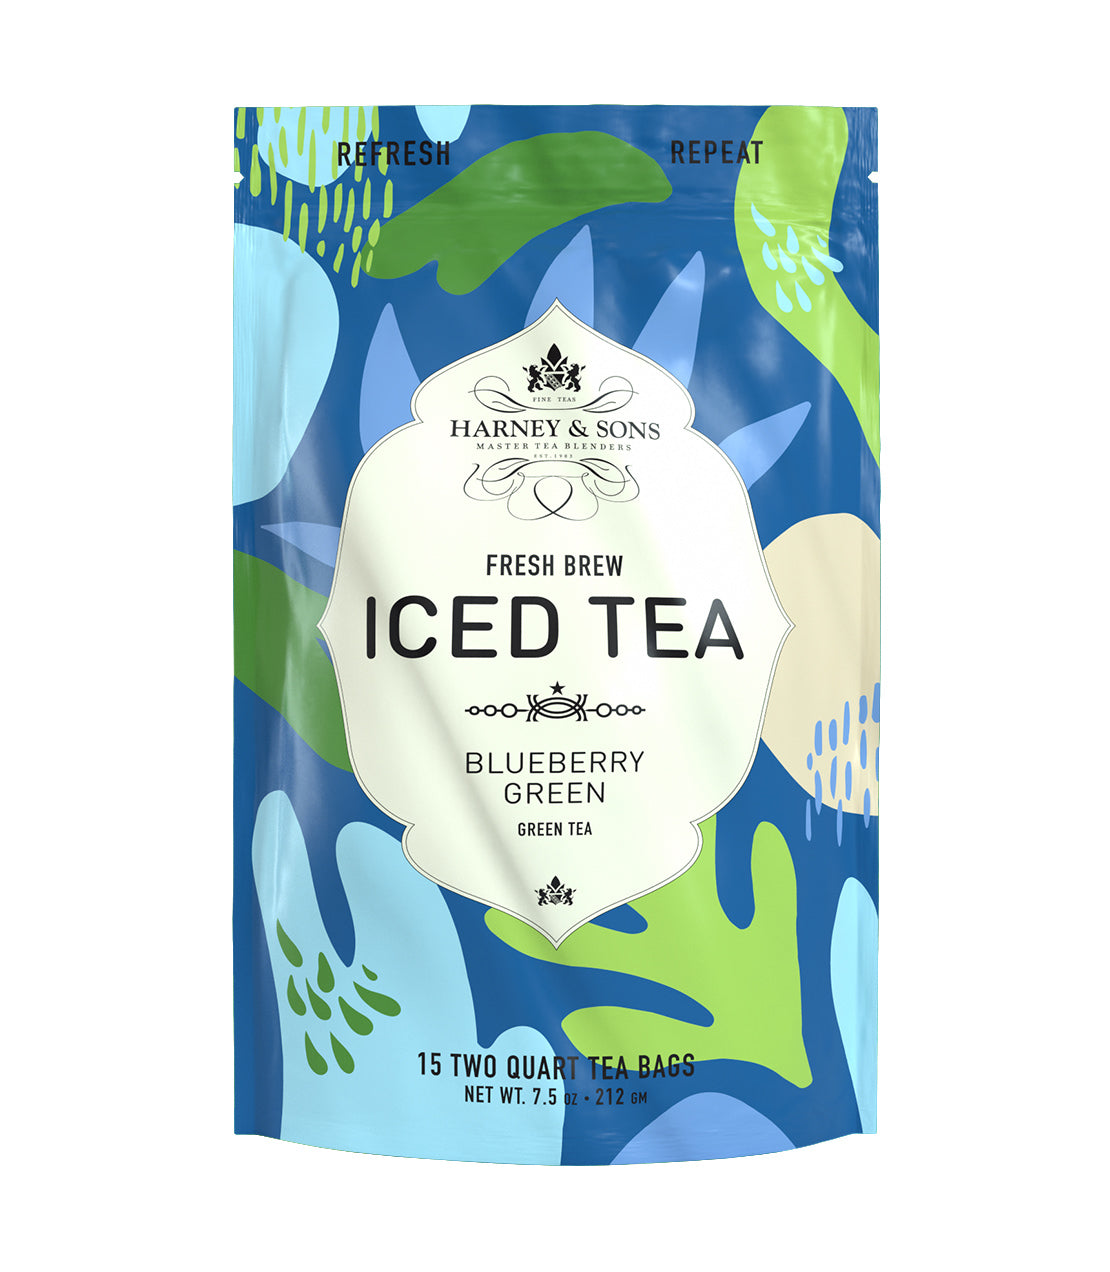 Blueberry Green - Iced Tea Pouches Bag of 15 Pouches - Harney & Sons Fine Teas